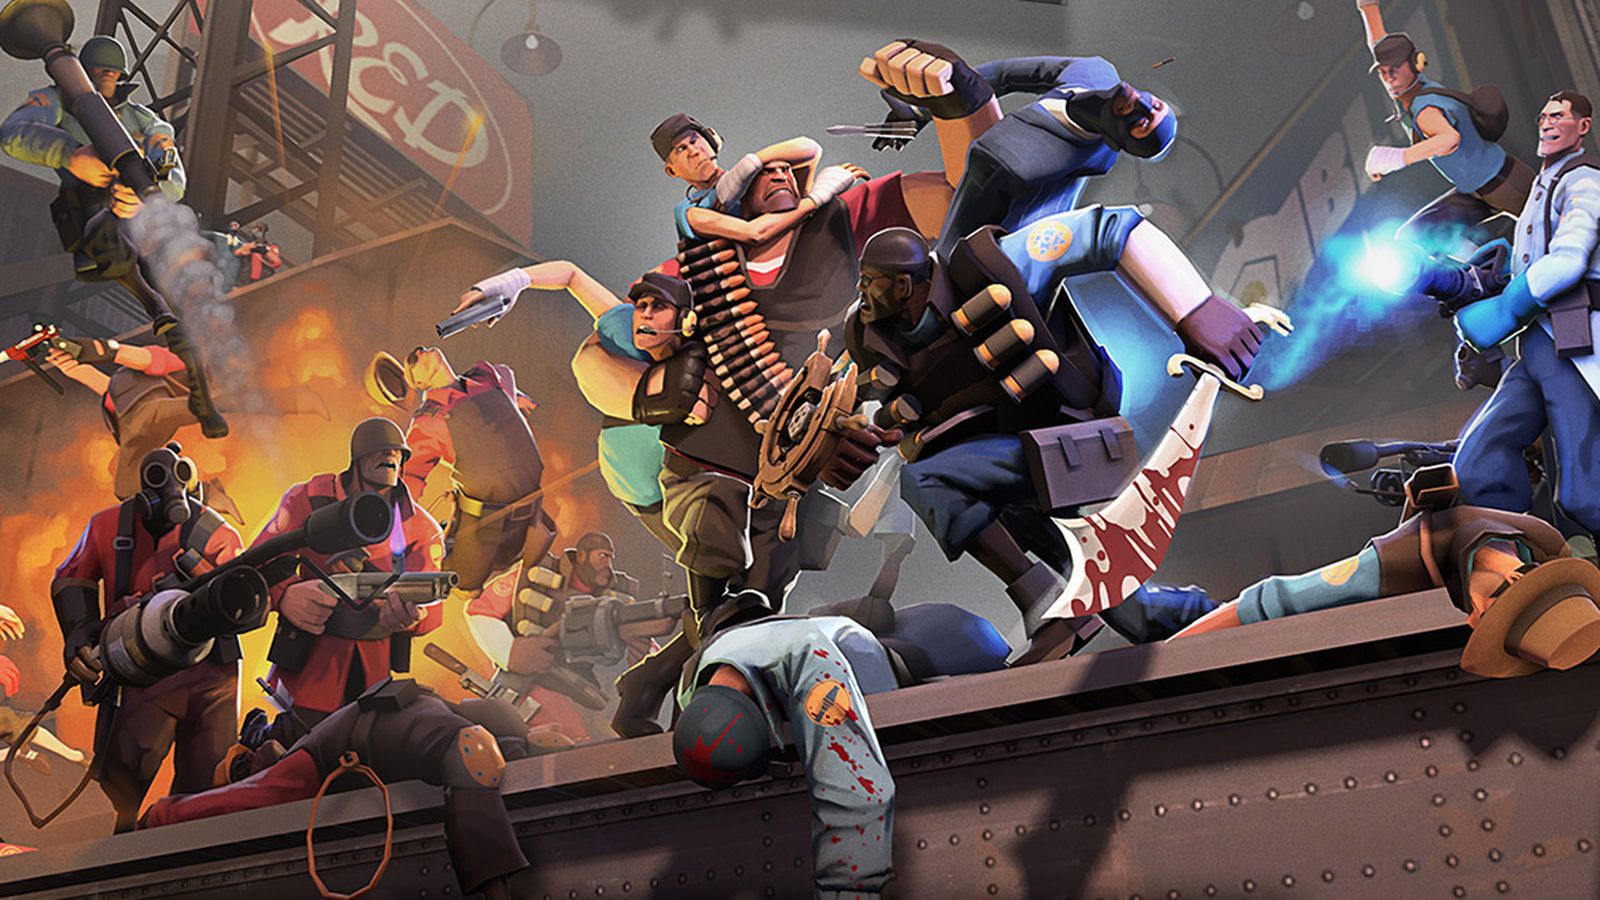 Team Fortress 2 Backgrounds, Compatible - PC, Mobile, Gadgets| 1600x900 px